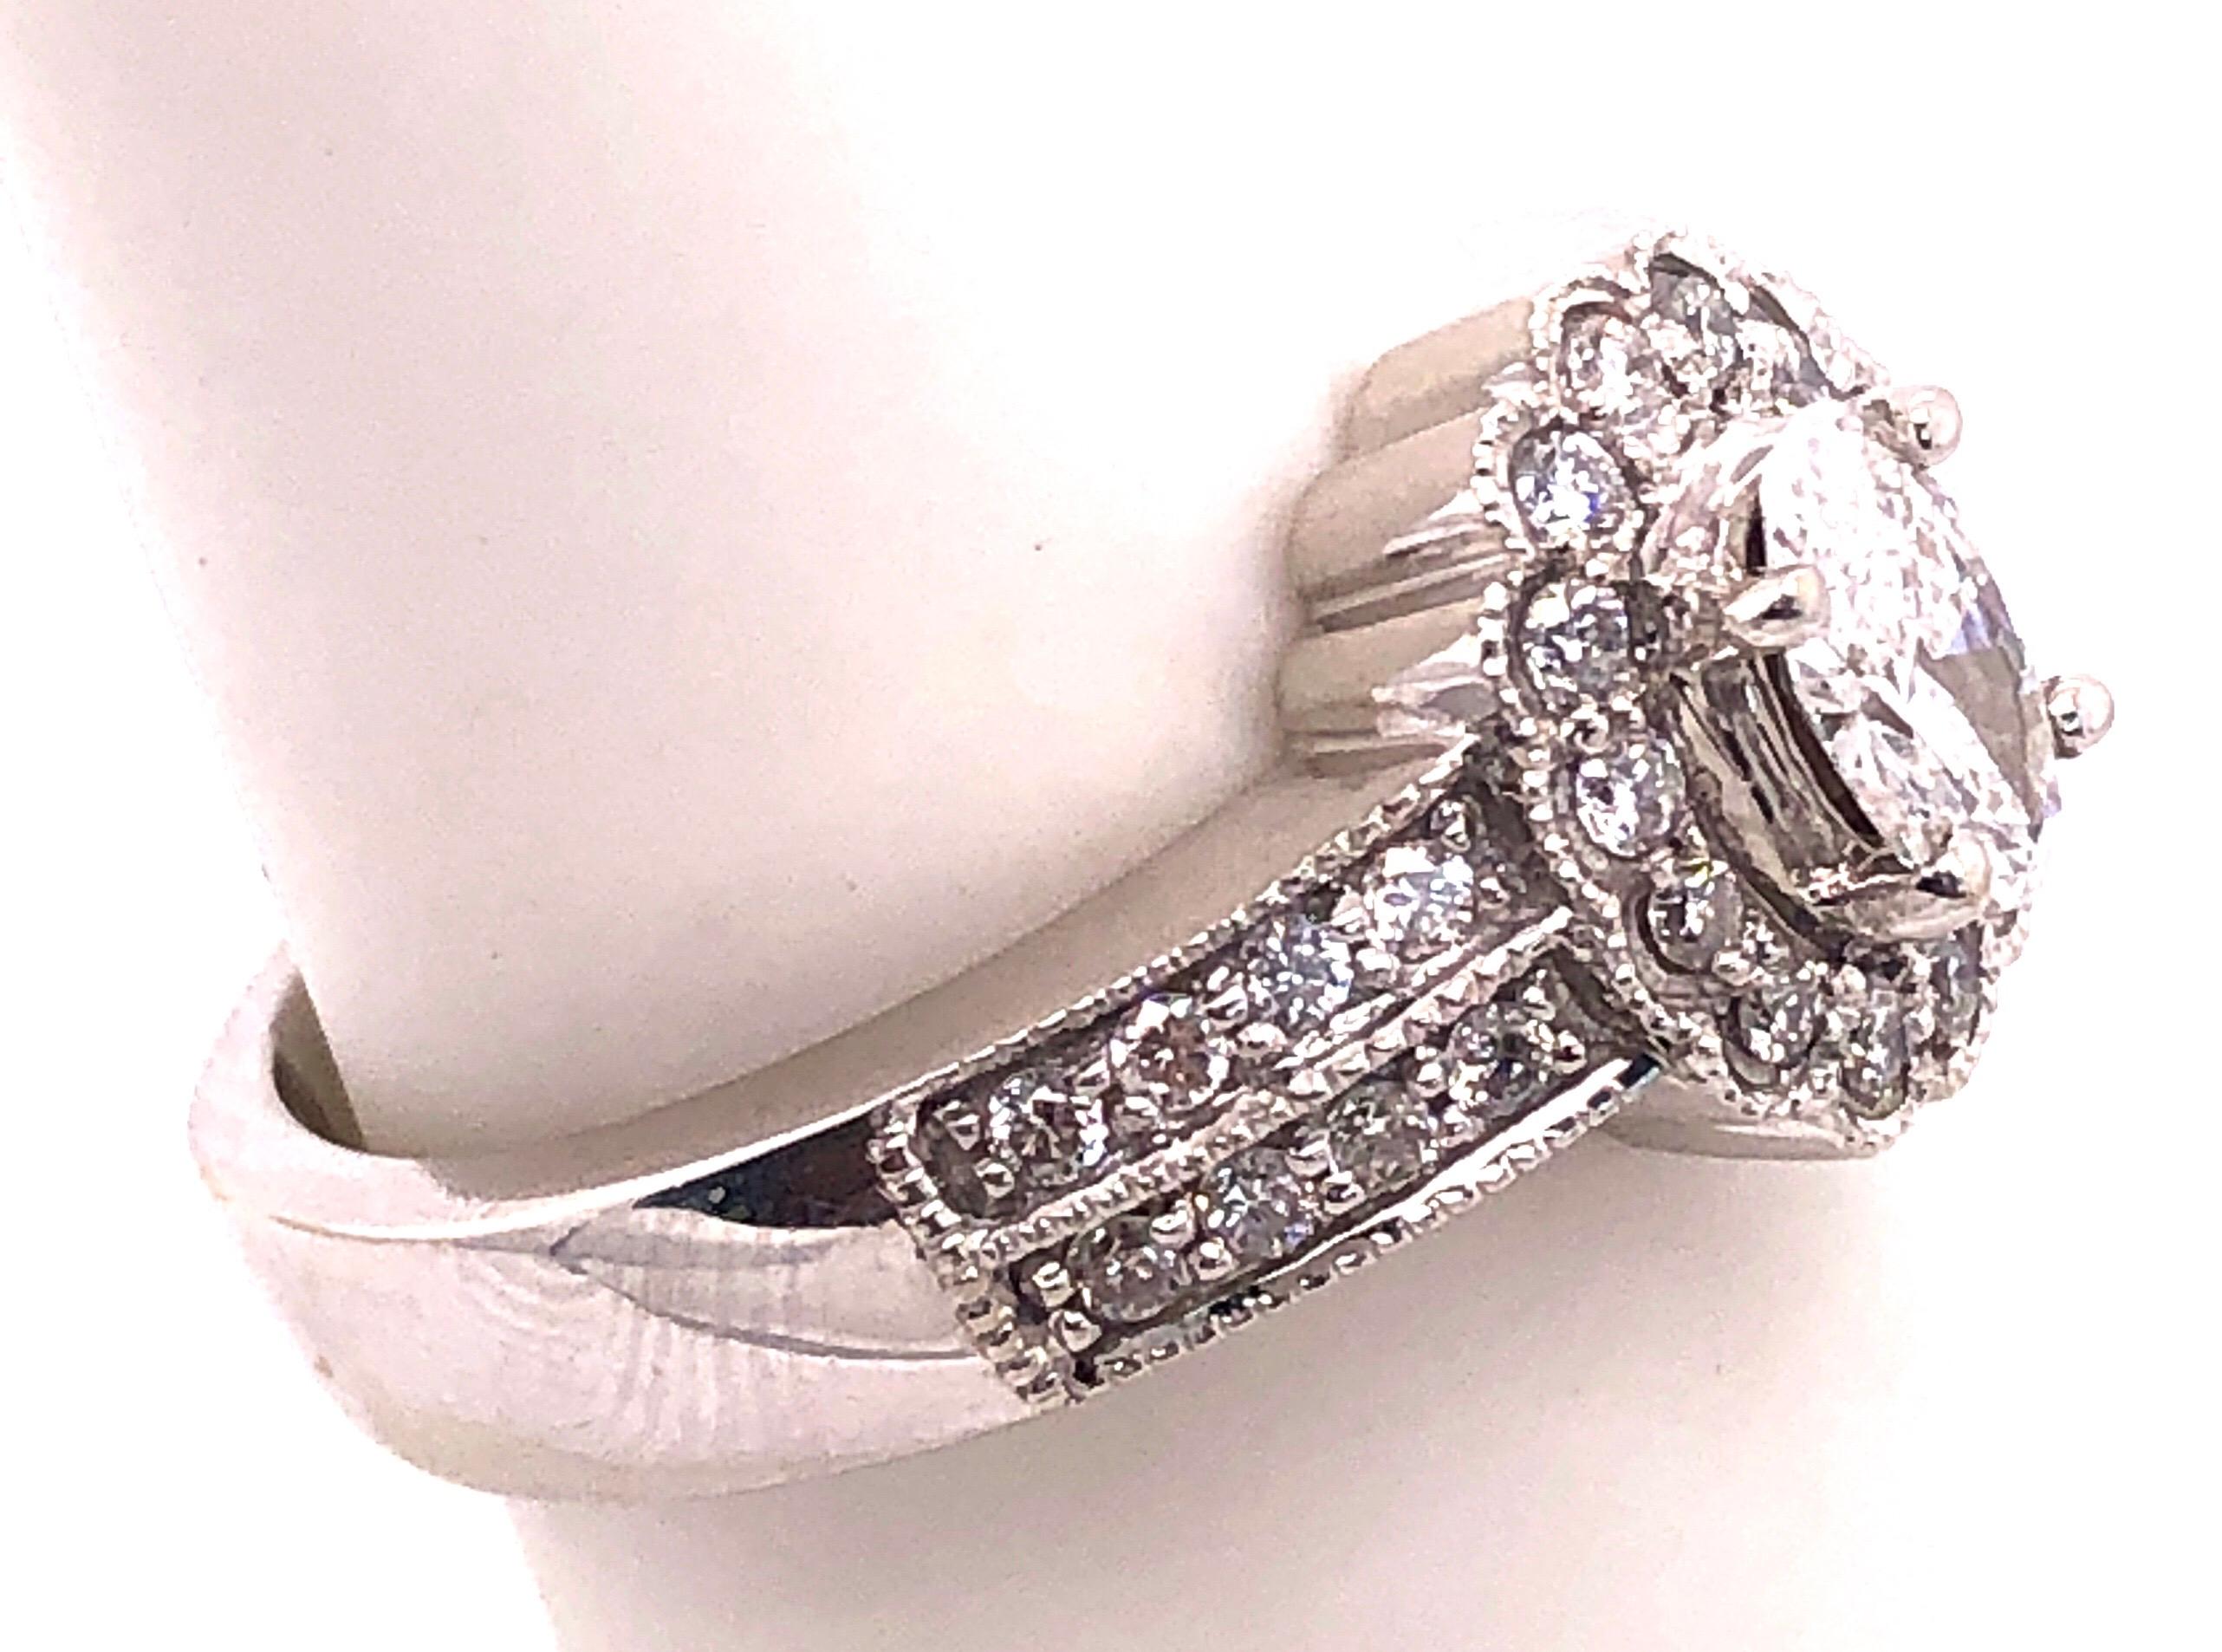 14 Karat White Gold Contemporary Ring with Diamonds 1.00 Total Diamond Weight.
Size 7
6 grams total weight.